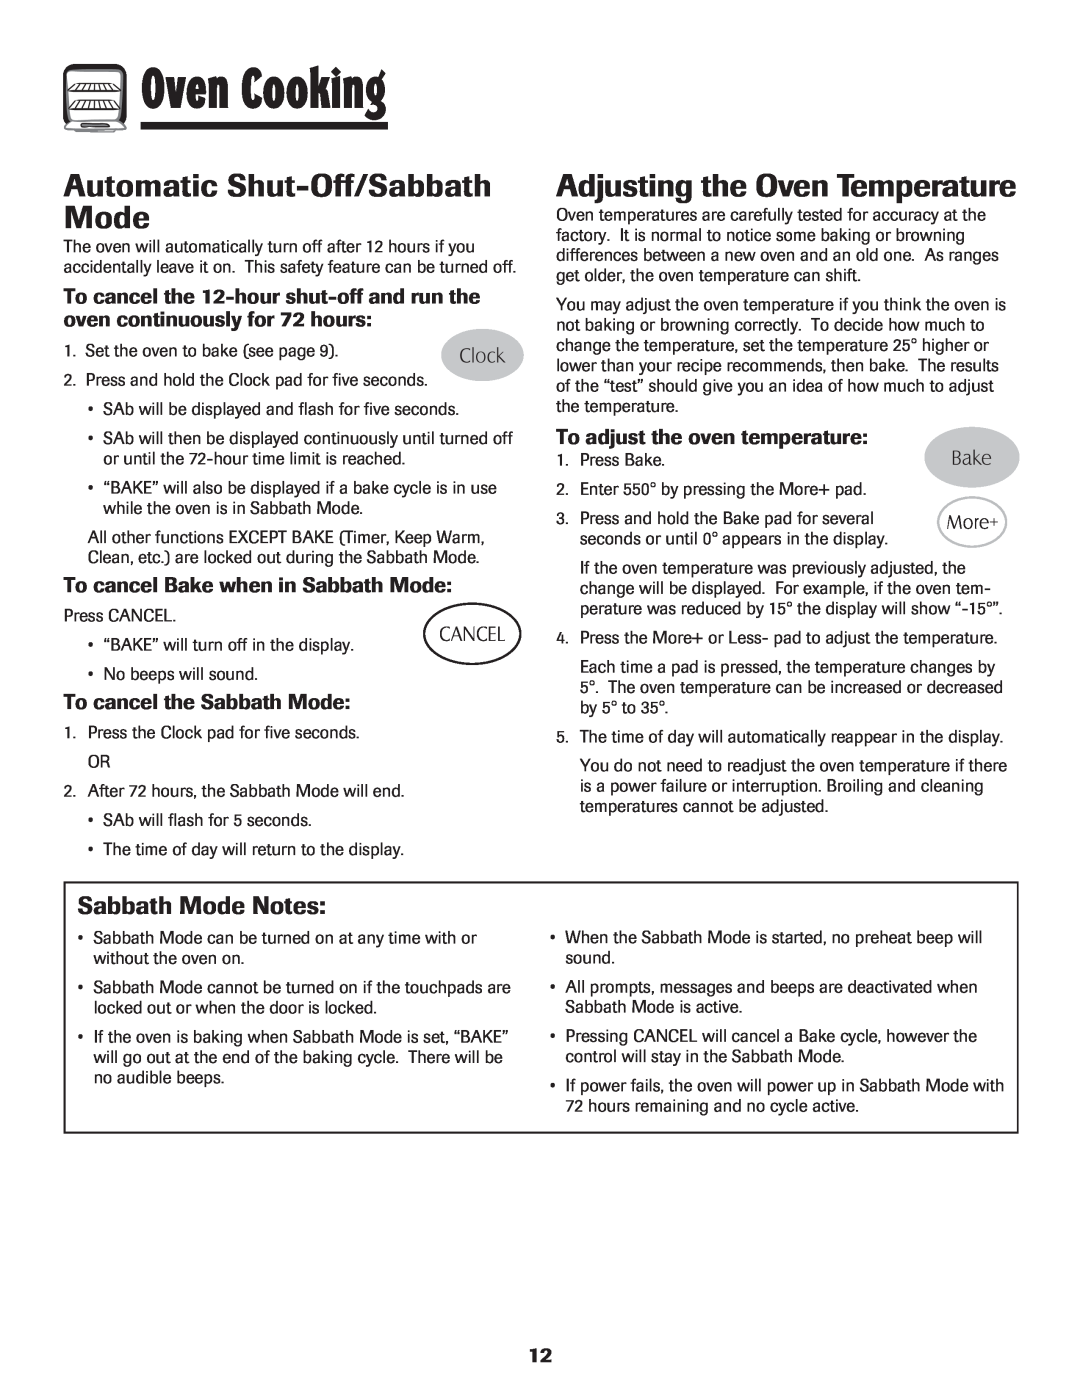 Maytag MER5552BAW Automatic Shut-Off/Sabbath Mode, Adjusting the Oven Temperature, Sabbath Mode Notes, Oven Cooking 